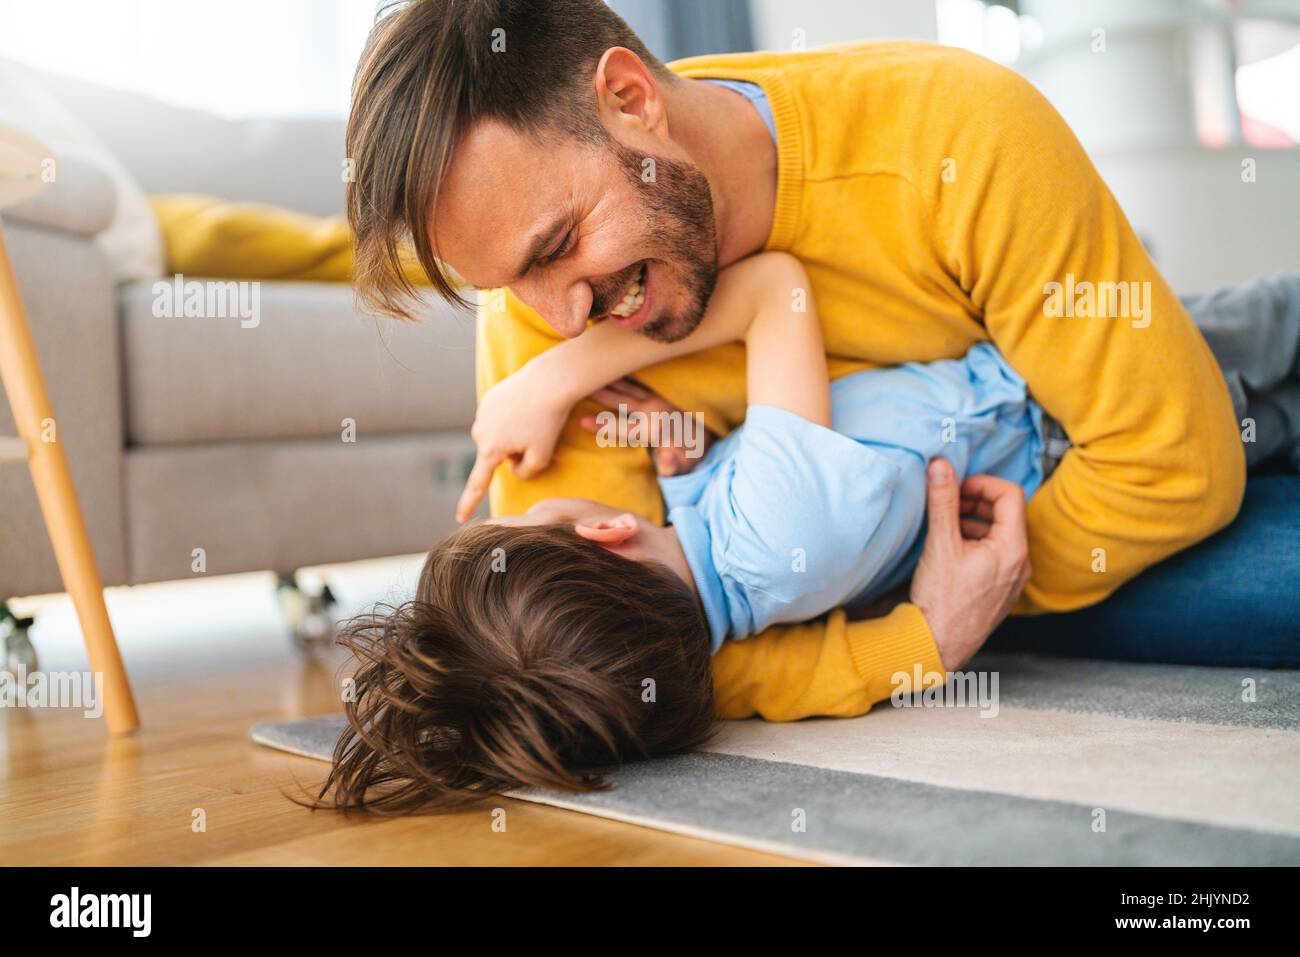 Joyful toddler boy having fun, playing with his father together at home. Stock Photo